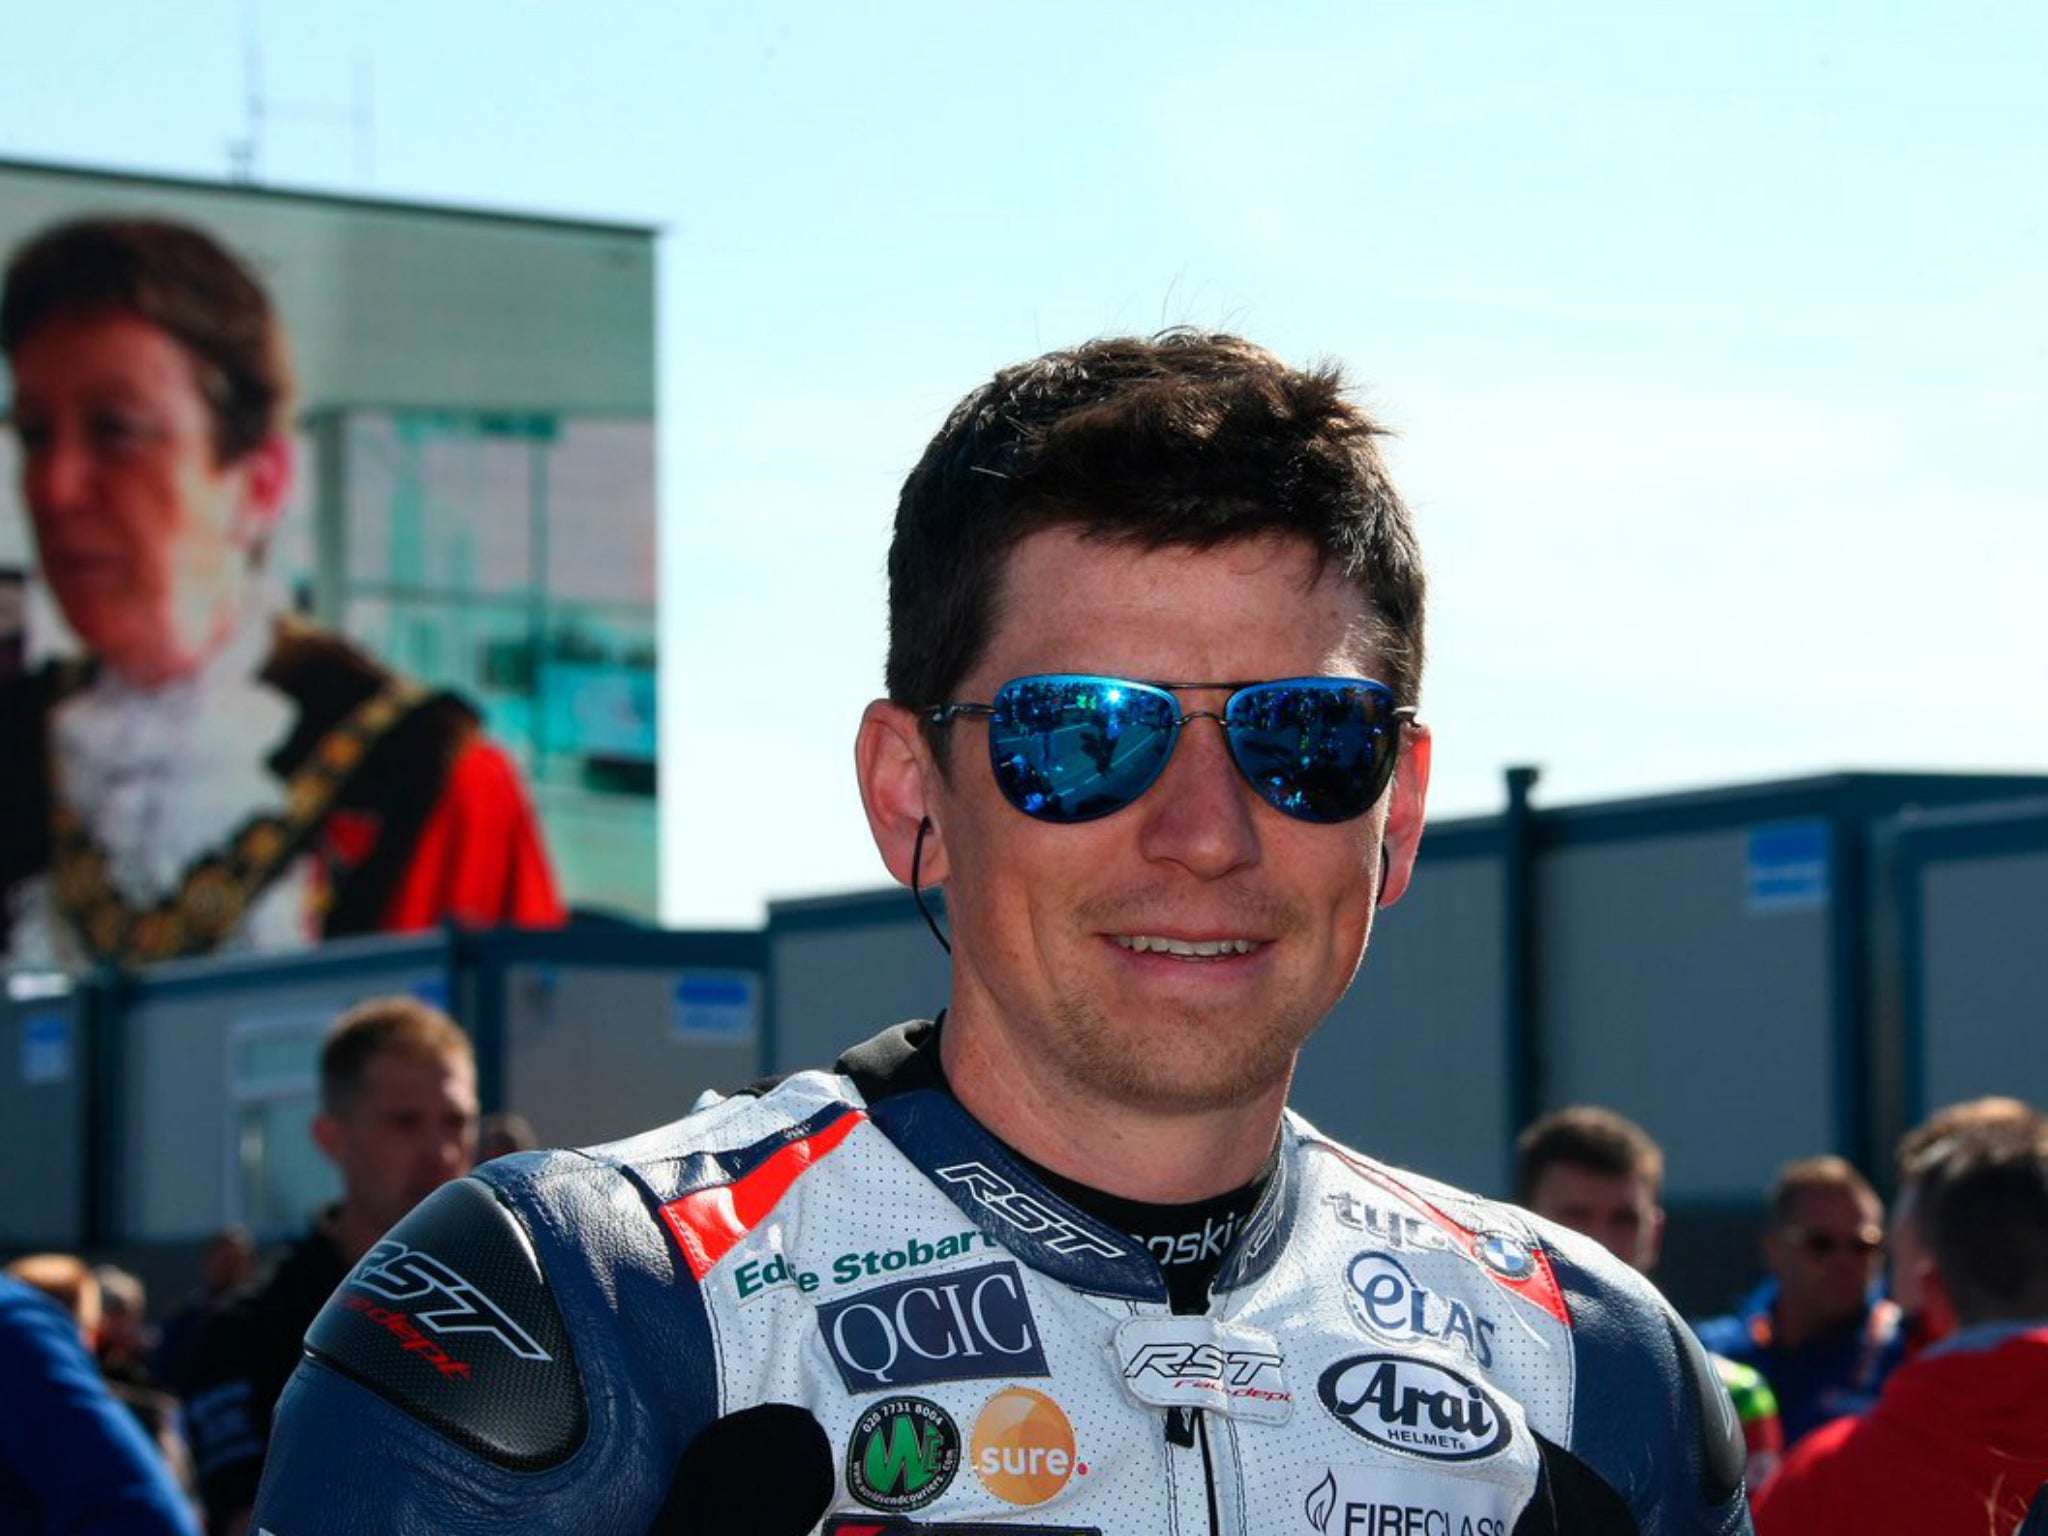 Dan Kneen suffered a fatal accident in practice for the Isle of Man TT